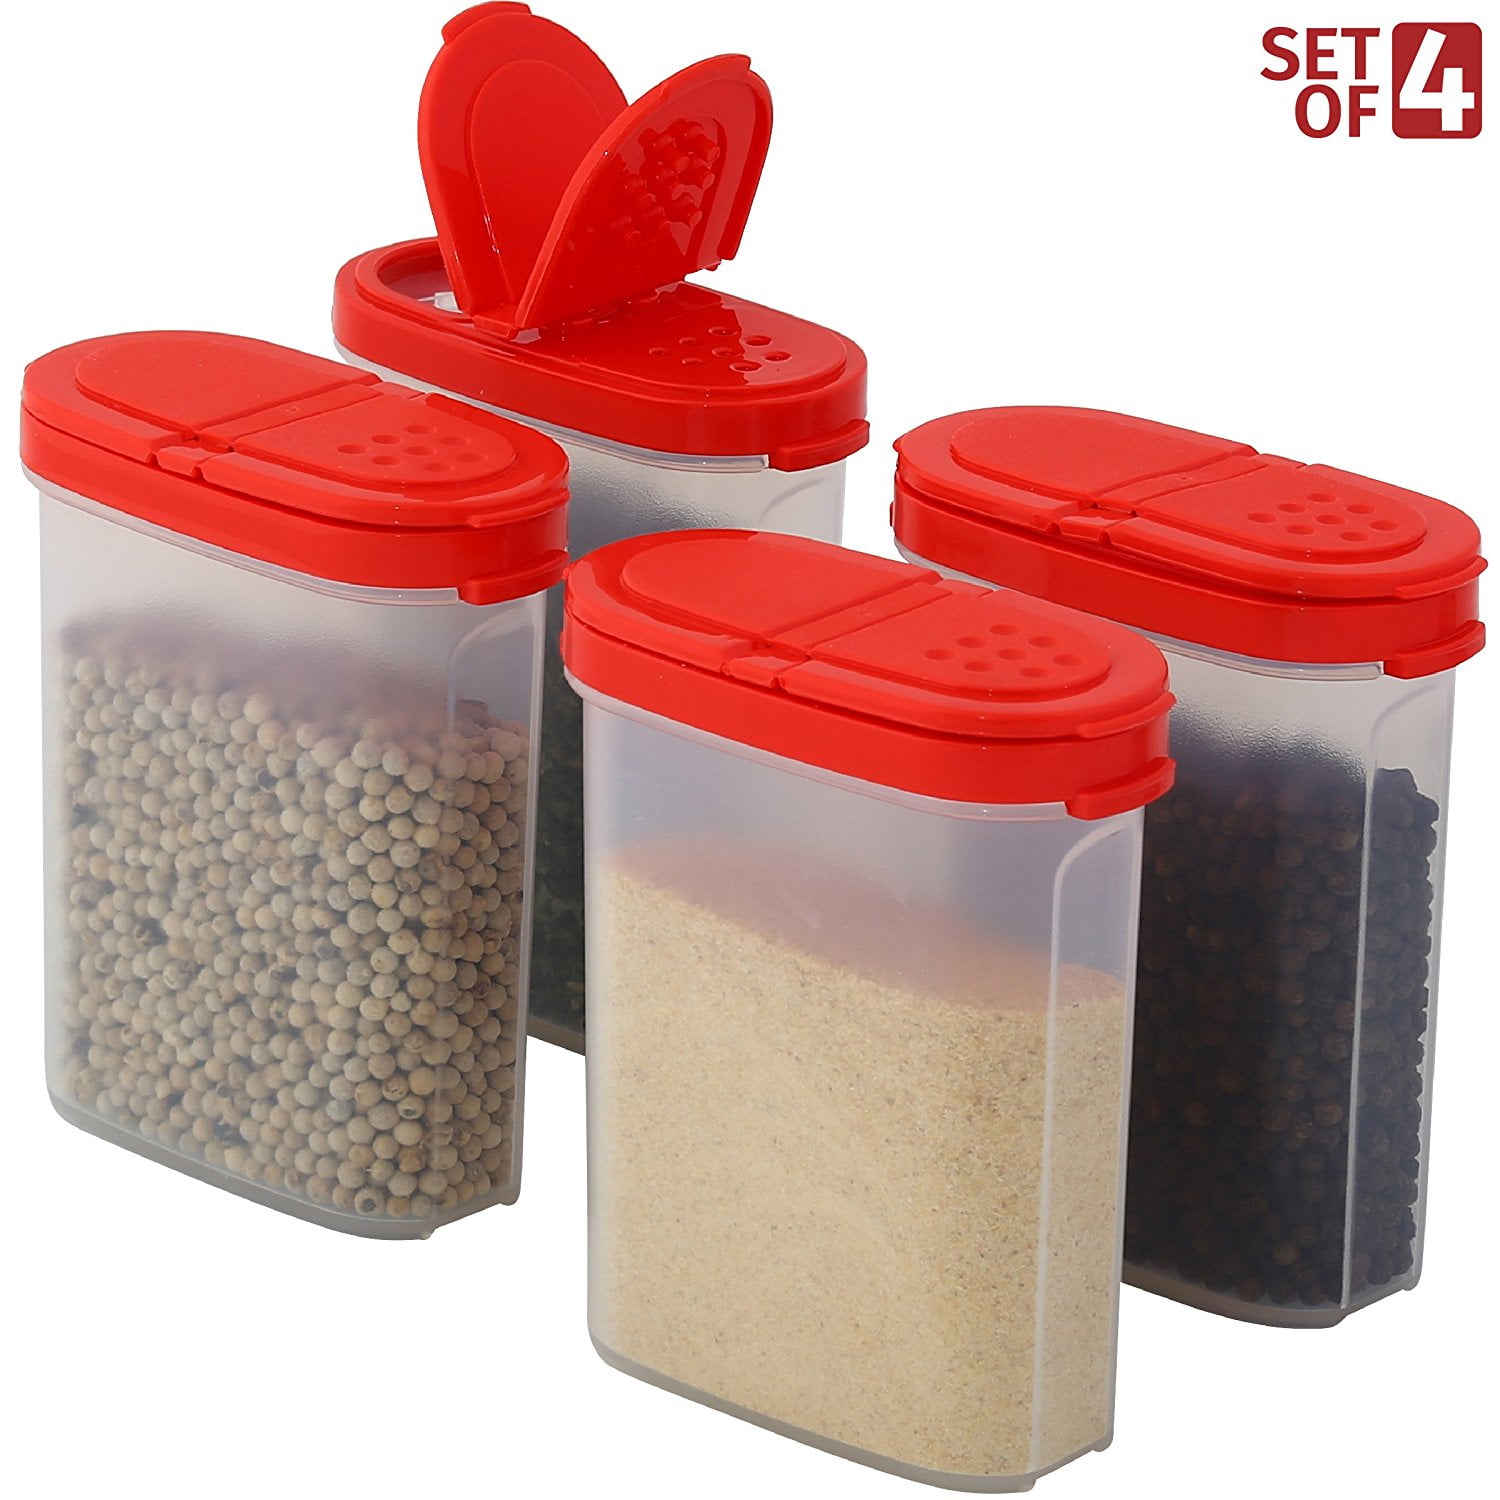 Signora Ware Spice Jars with Shaker Lids Refillable Seasoning Containers,  4-Pack Red 